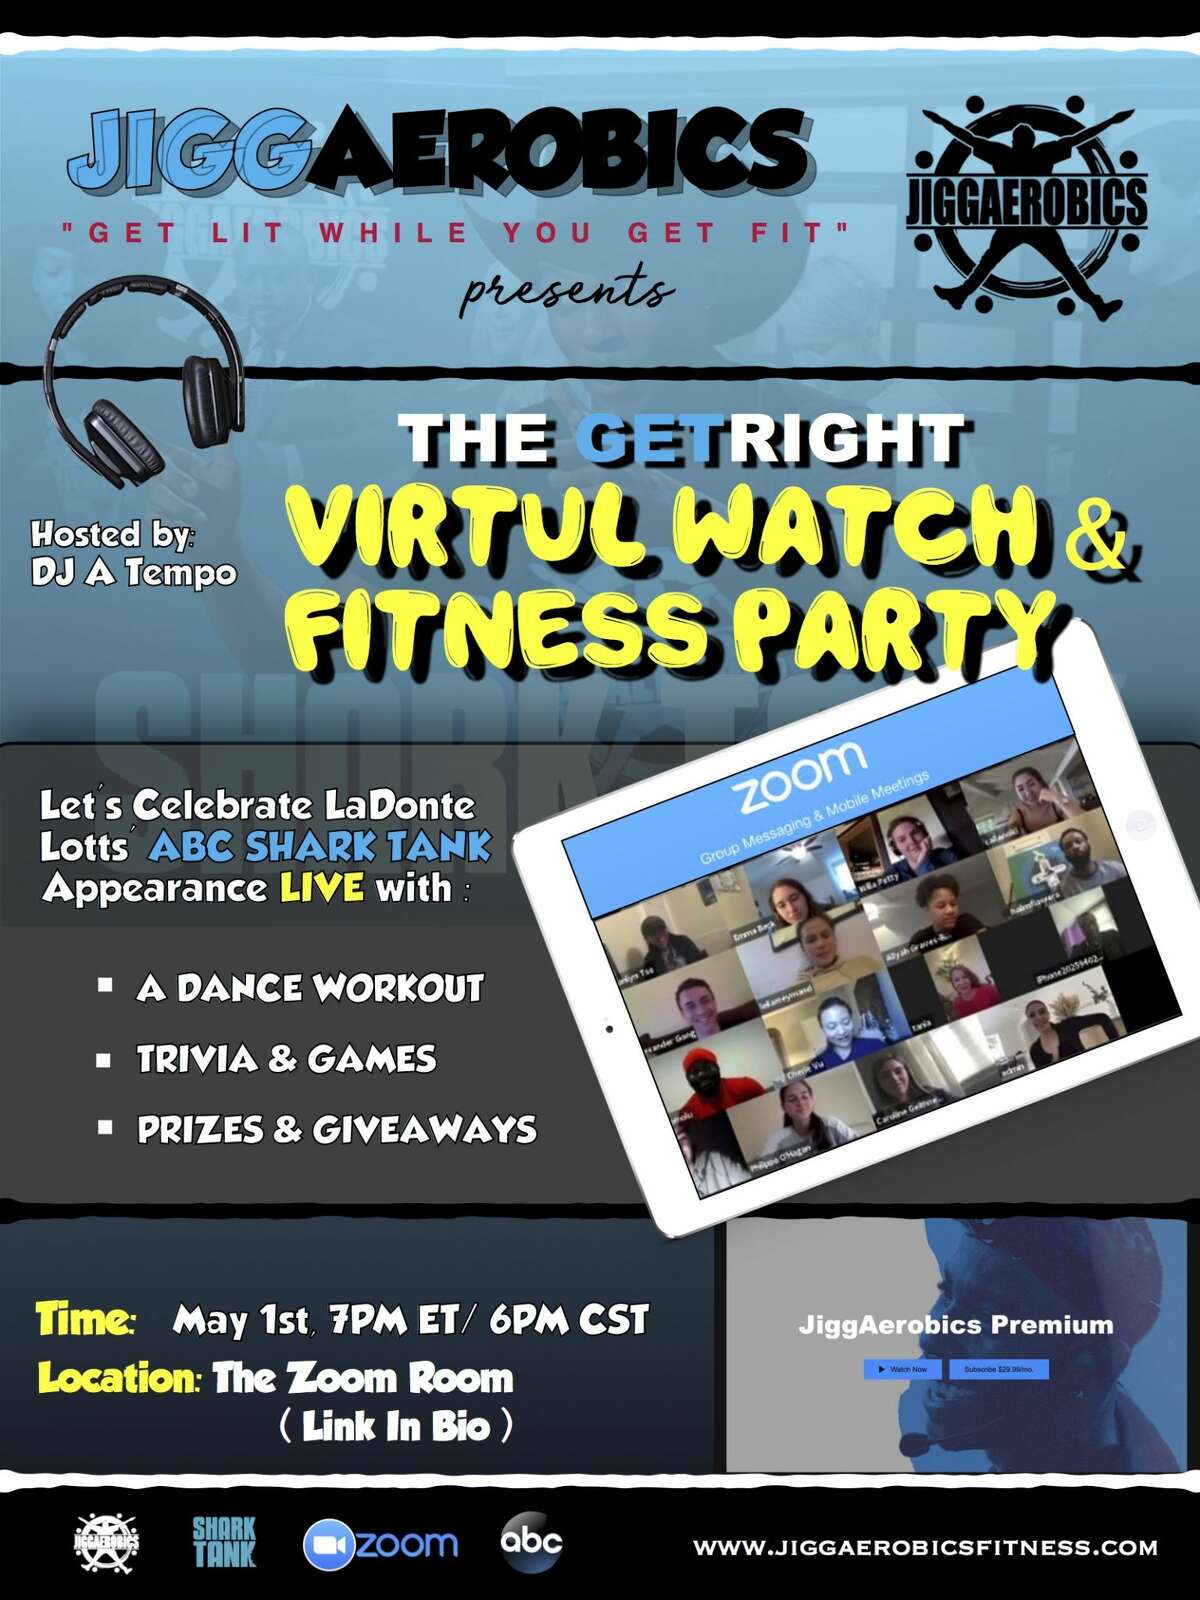 JiggAerobics is inviting everyone to tune in for "The GetRight virtual watch & fitness party," to celebrate Founder, LaDonte Lotts' ABC Shark Tank appearance tonight.